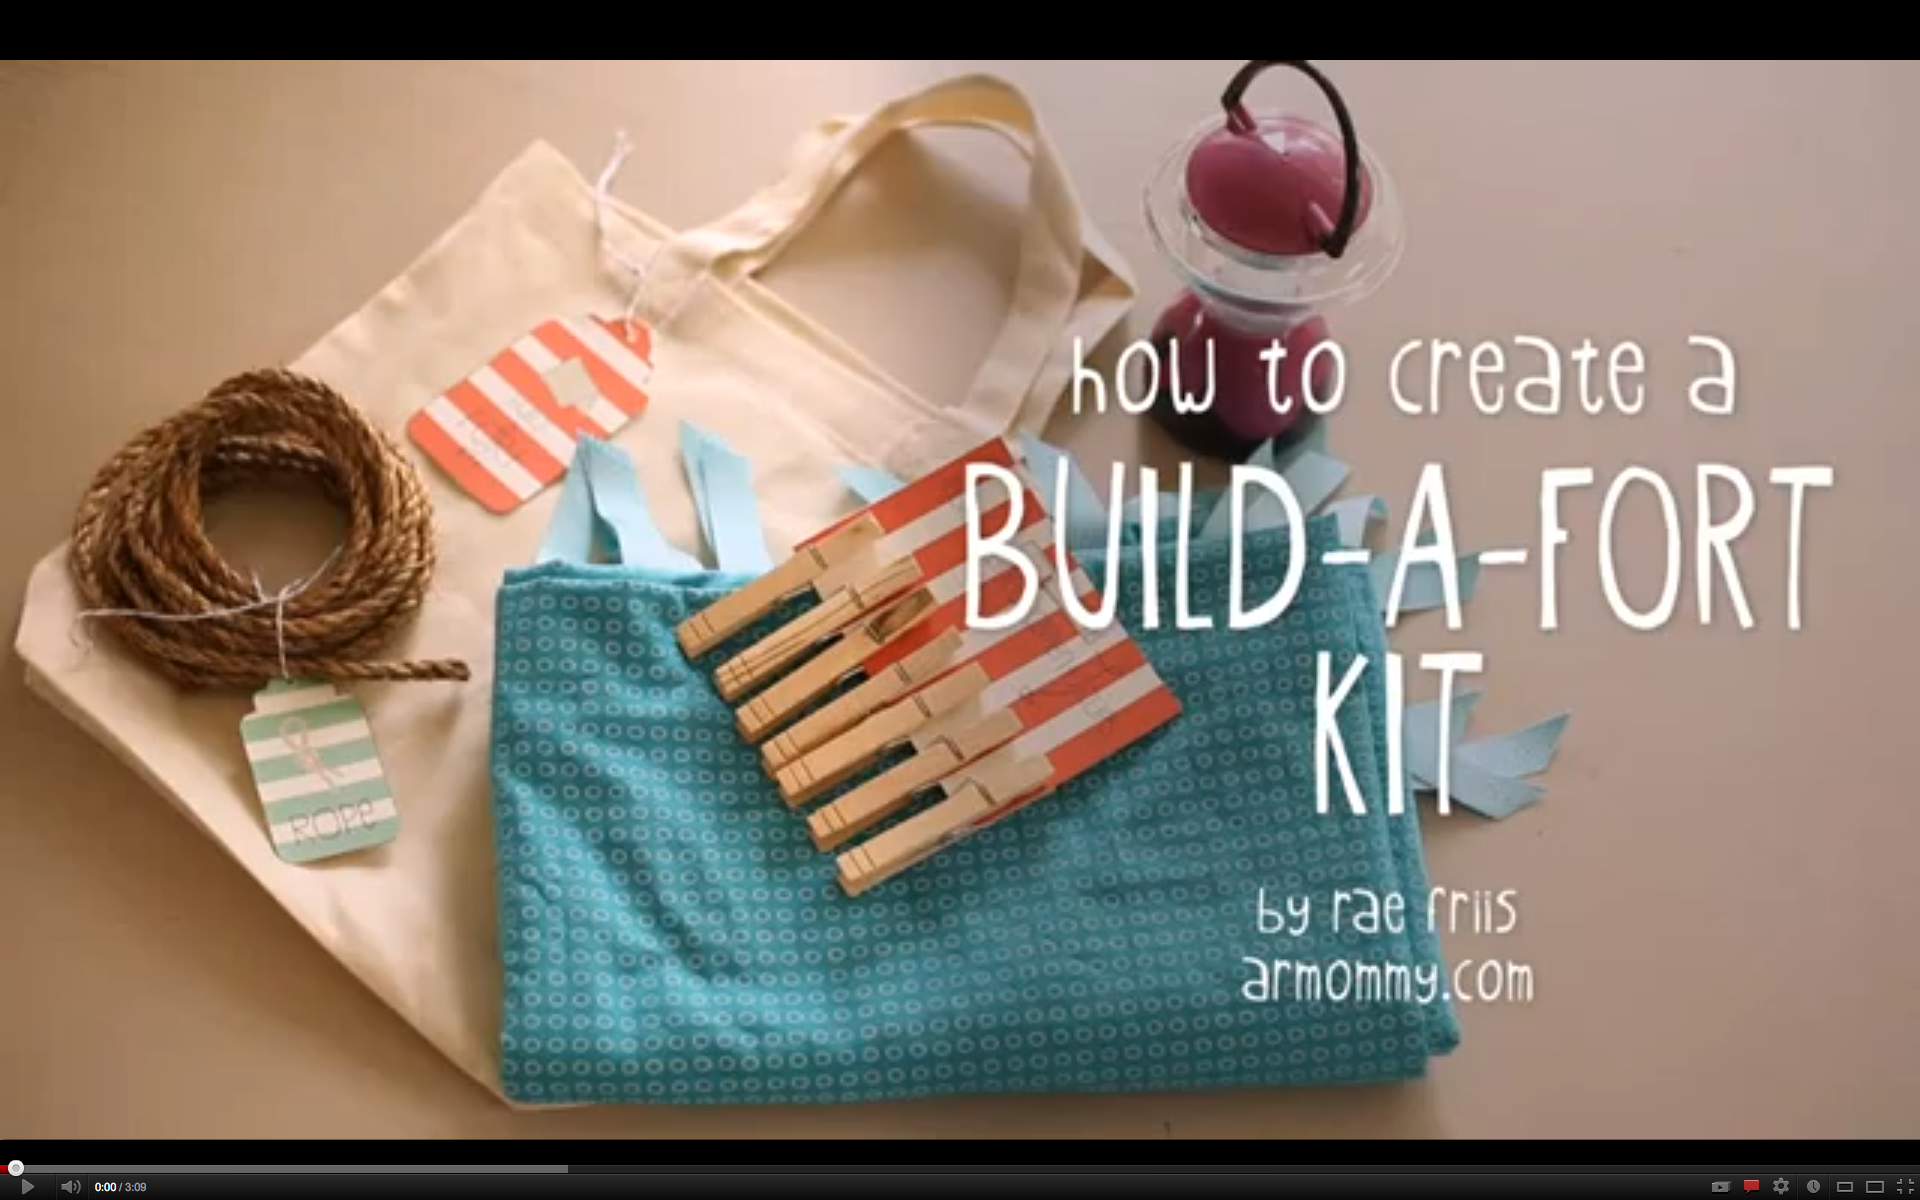 smitten with the build a fort kit tutorial.  happy kids & easy clean up.  great to have at home or give as a gift.  #DIY #kids